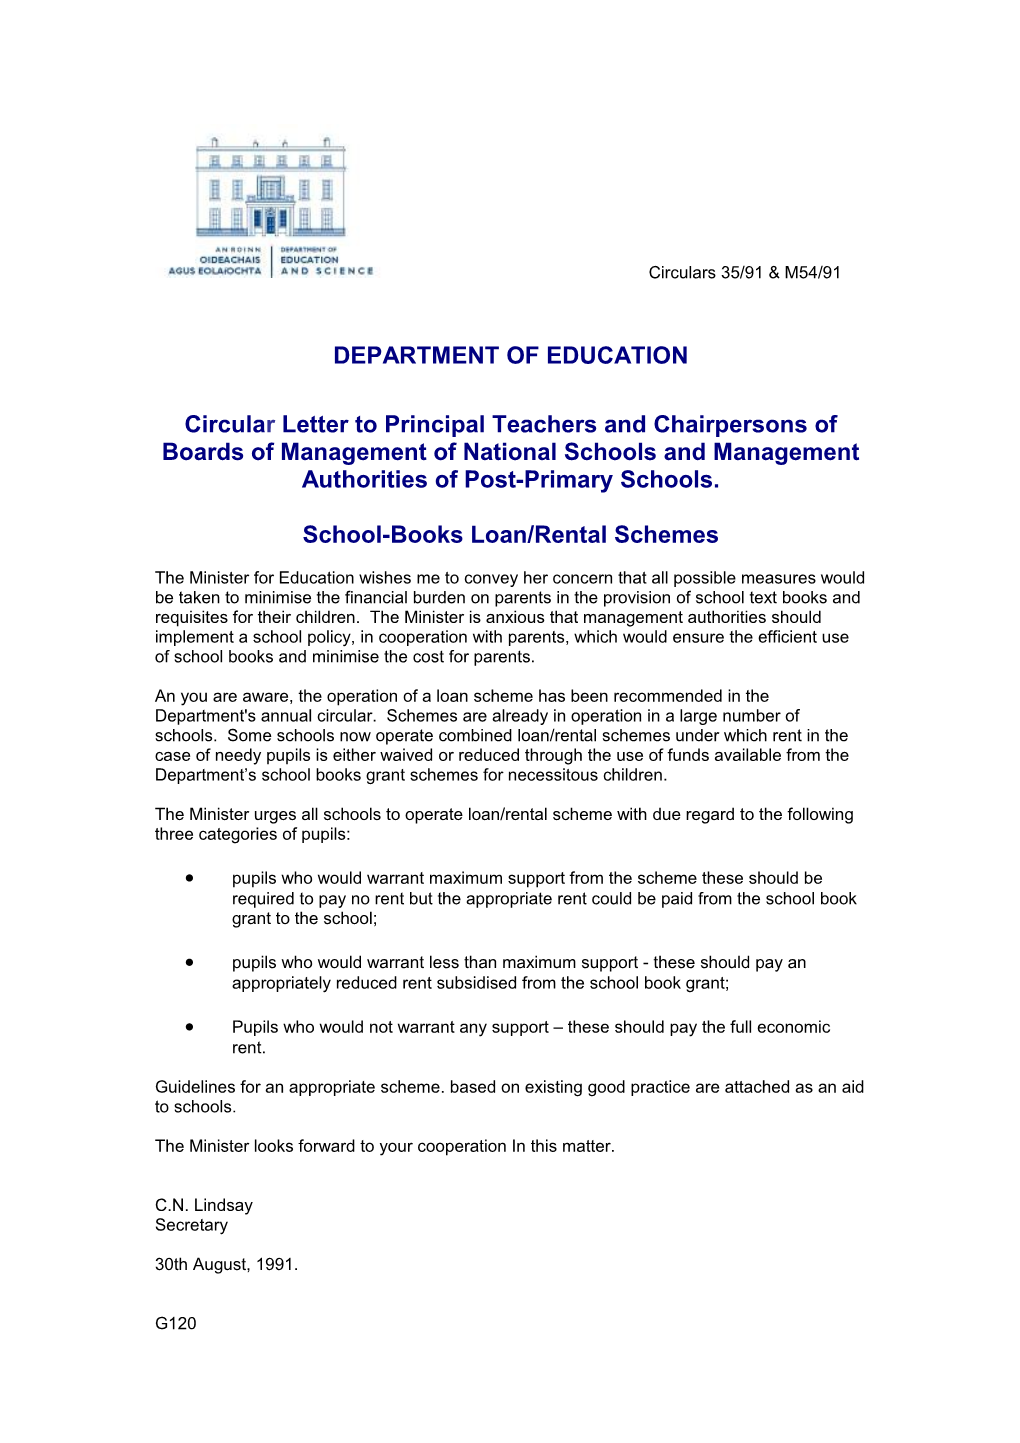 Circular Letter 35/91 & M54/91 - School-Books Loan/Rental Schemes - Guidelines for The